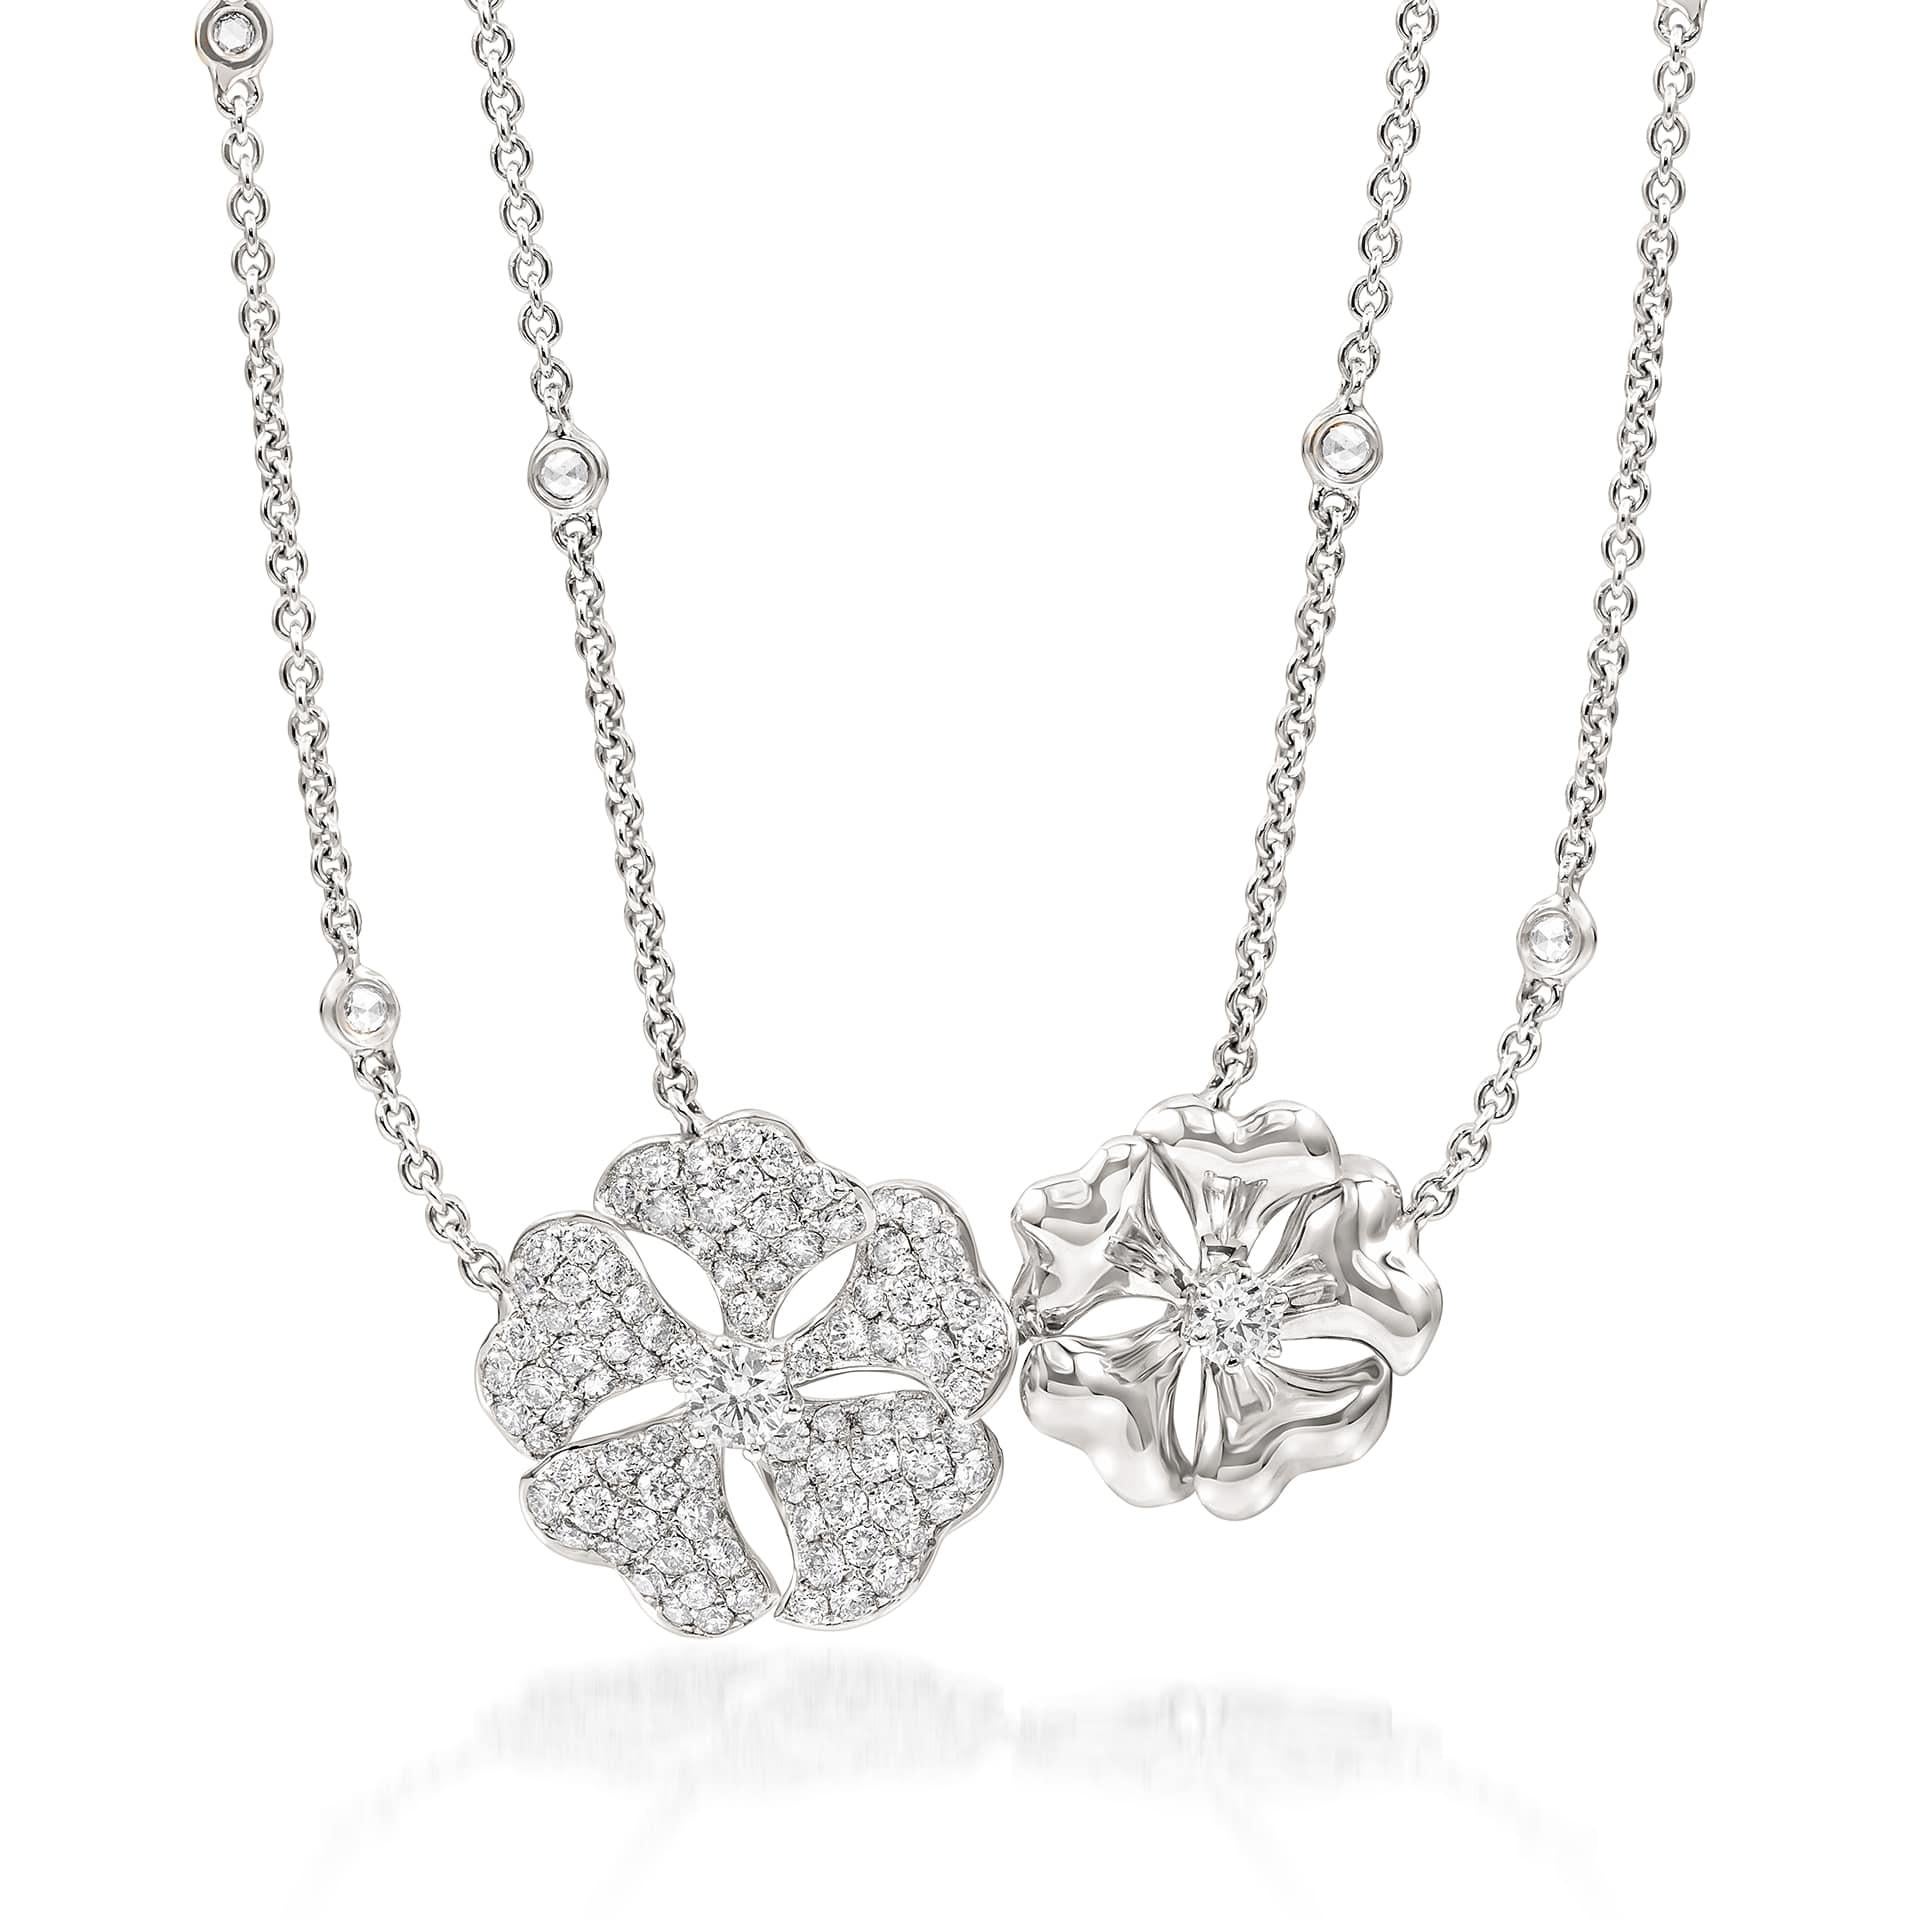 Bloom Diamond Cluster Flower Necklace in 18K White Gold

Inspired by the exquisite petals of the alpine cinquefoil flower, the Bloom collection combines the richness of diamonds and precious metals with the light versatility of this delicate,